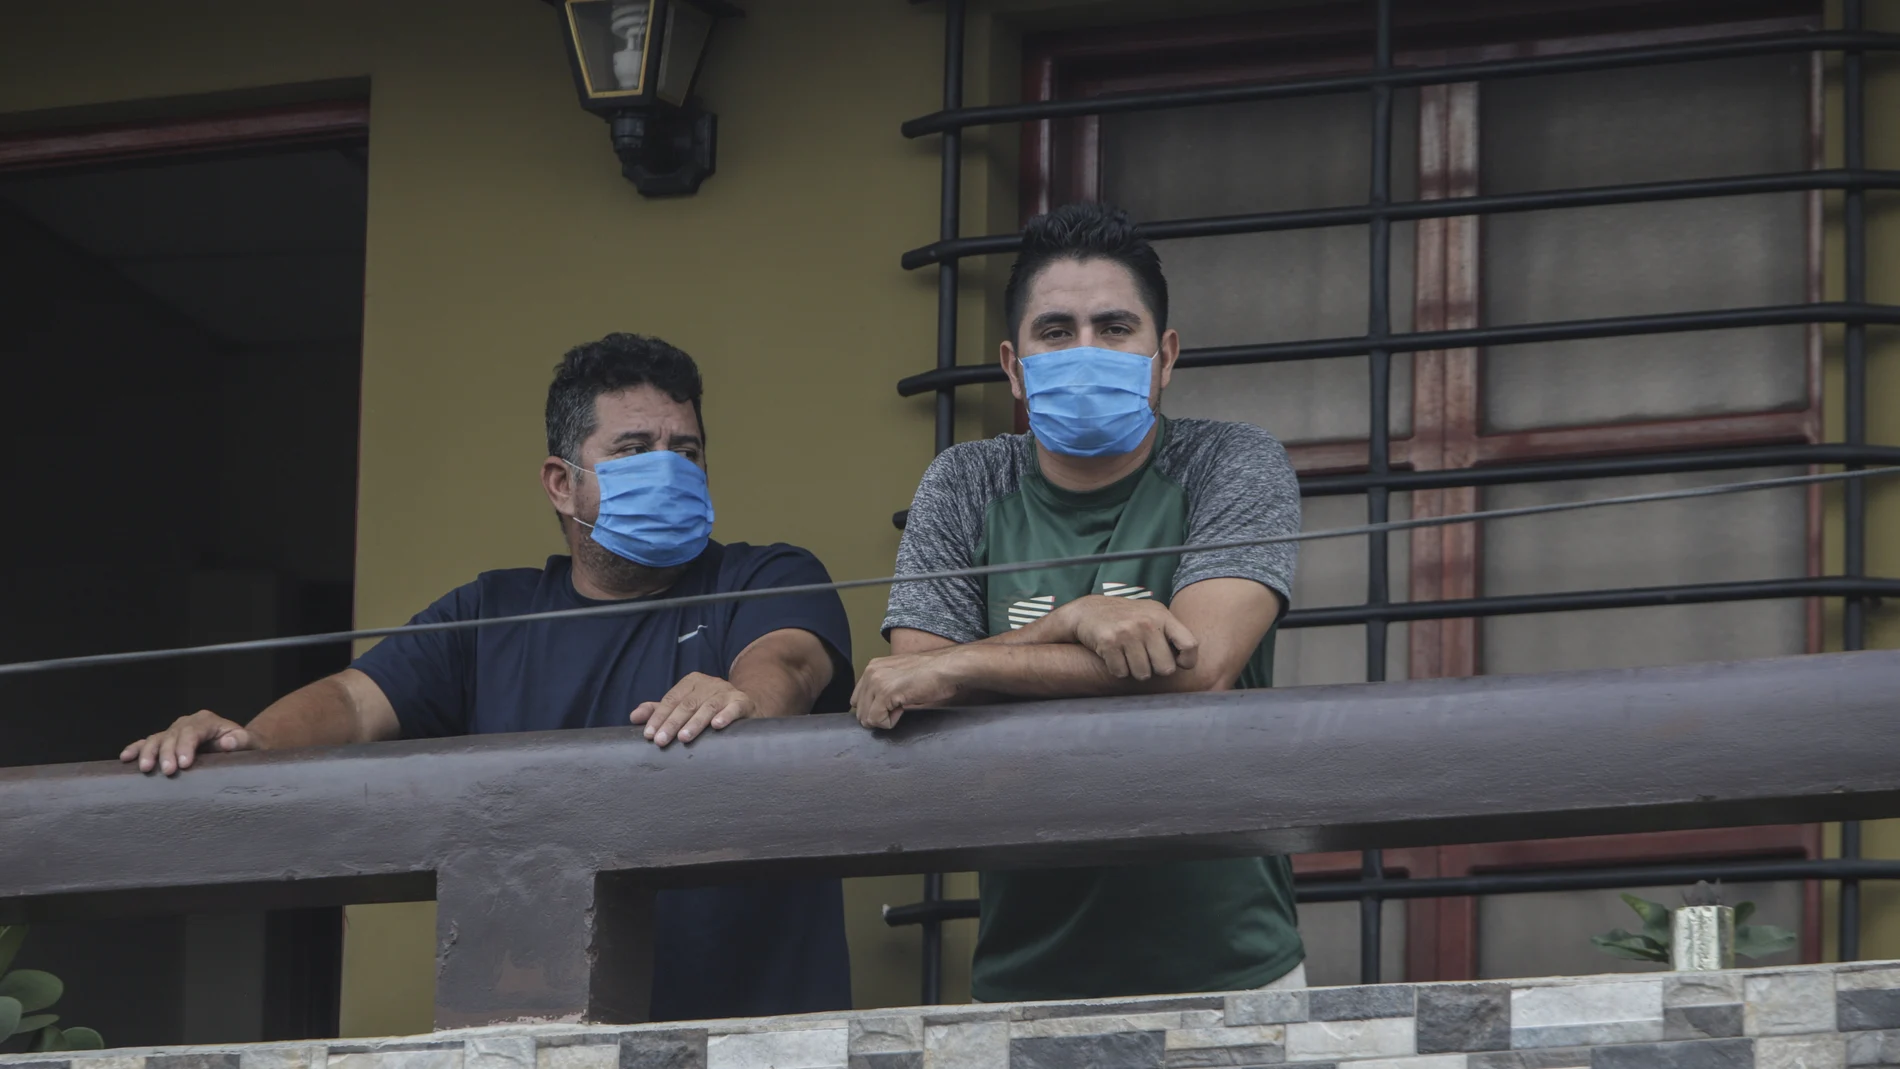 Norman Cardoze Sr., left, and his son Norman Cardoze Jr. pose for a photo from the balcony of their home where they are in quarantine after catching the new coronavirus in Managua, Nicaragua, Wednesday, May 27, 2020. During a May 16 game, manager Norman Cardoze Sr. and coach Carlos Aranda felt sick. Cardozeâ€™s son Norman Jr., the teamâ€™s star slugger, was so weak and achy he didnâ€™t play. Within two days all three men were hospitalized, where the Cardozes spent a week and Aranda died. (AP Photo/Alfredo Zuniga)